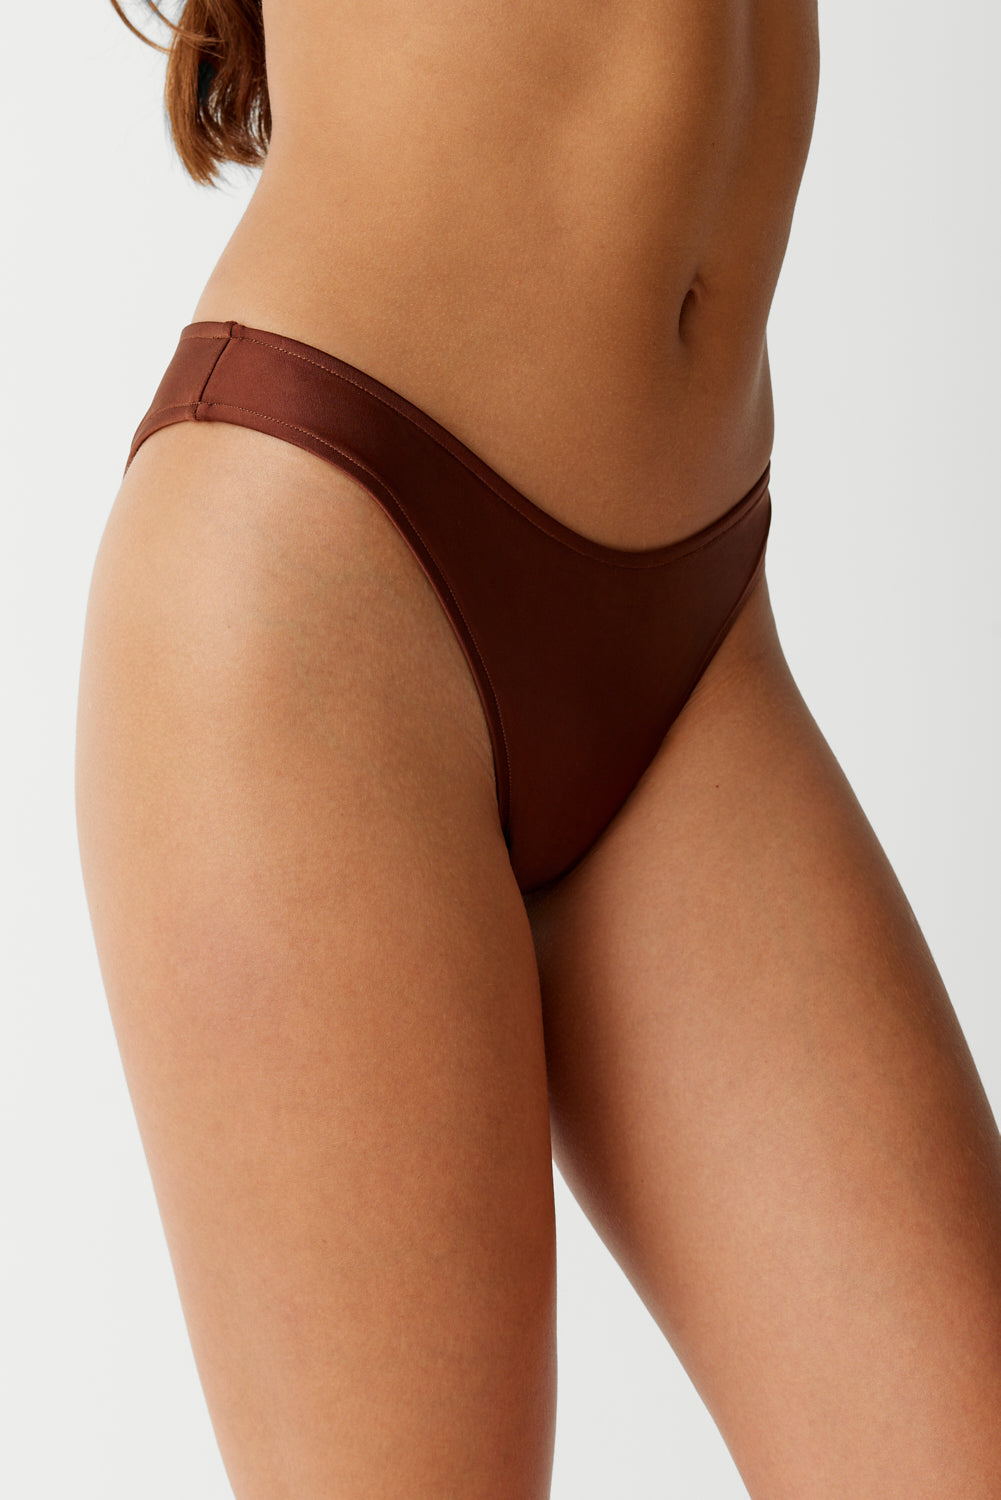 Shop for Miss Mary of Sweden, Brown, Lingerie